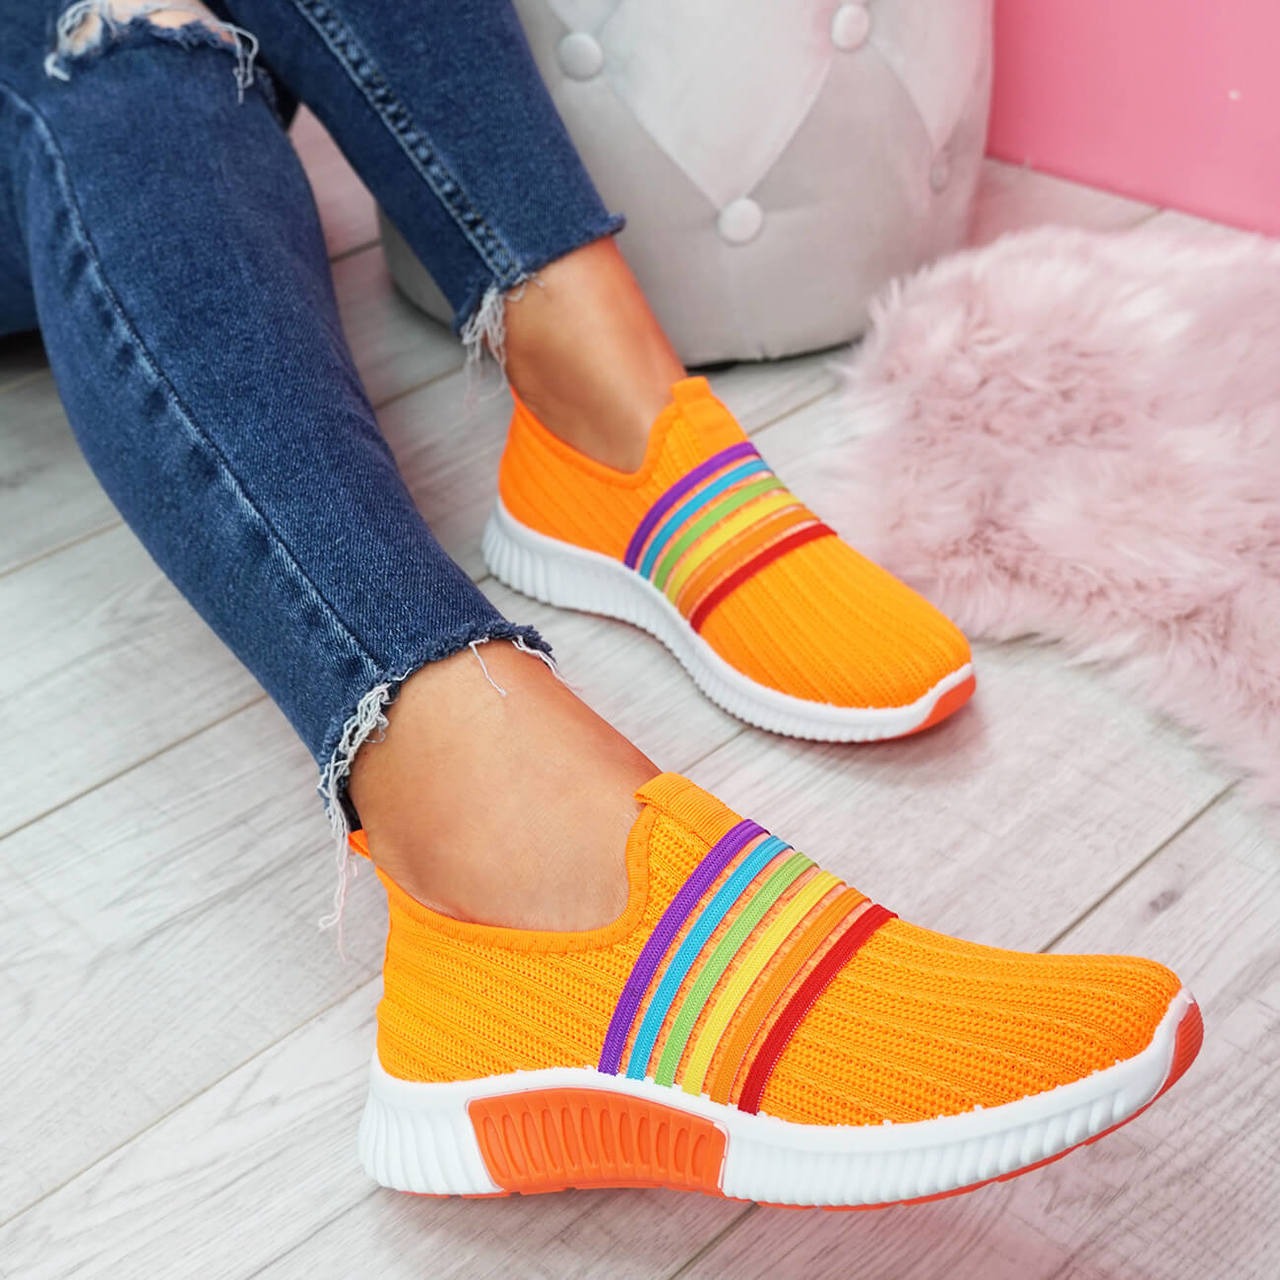 Comfortable Walking Orthopedic Shoes For Women Knitted Colorful Slip-on